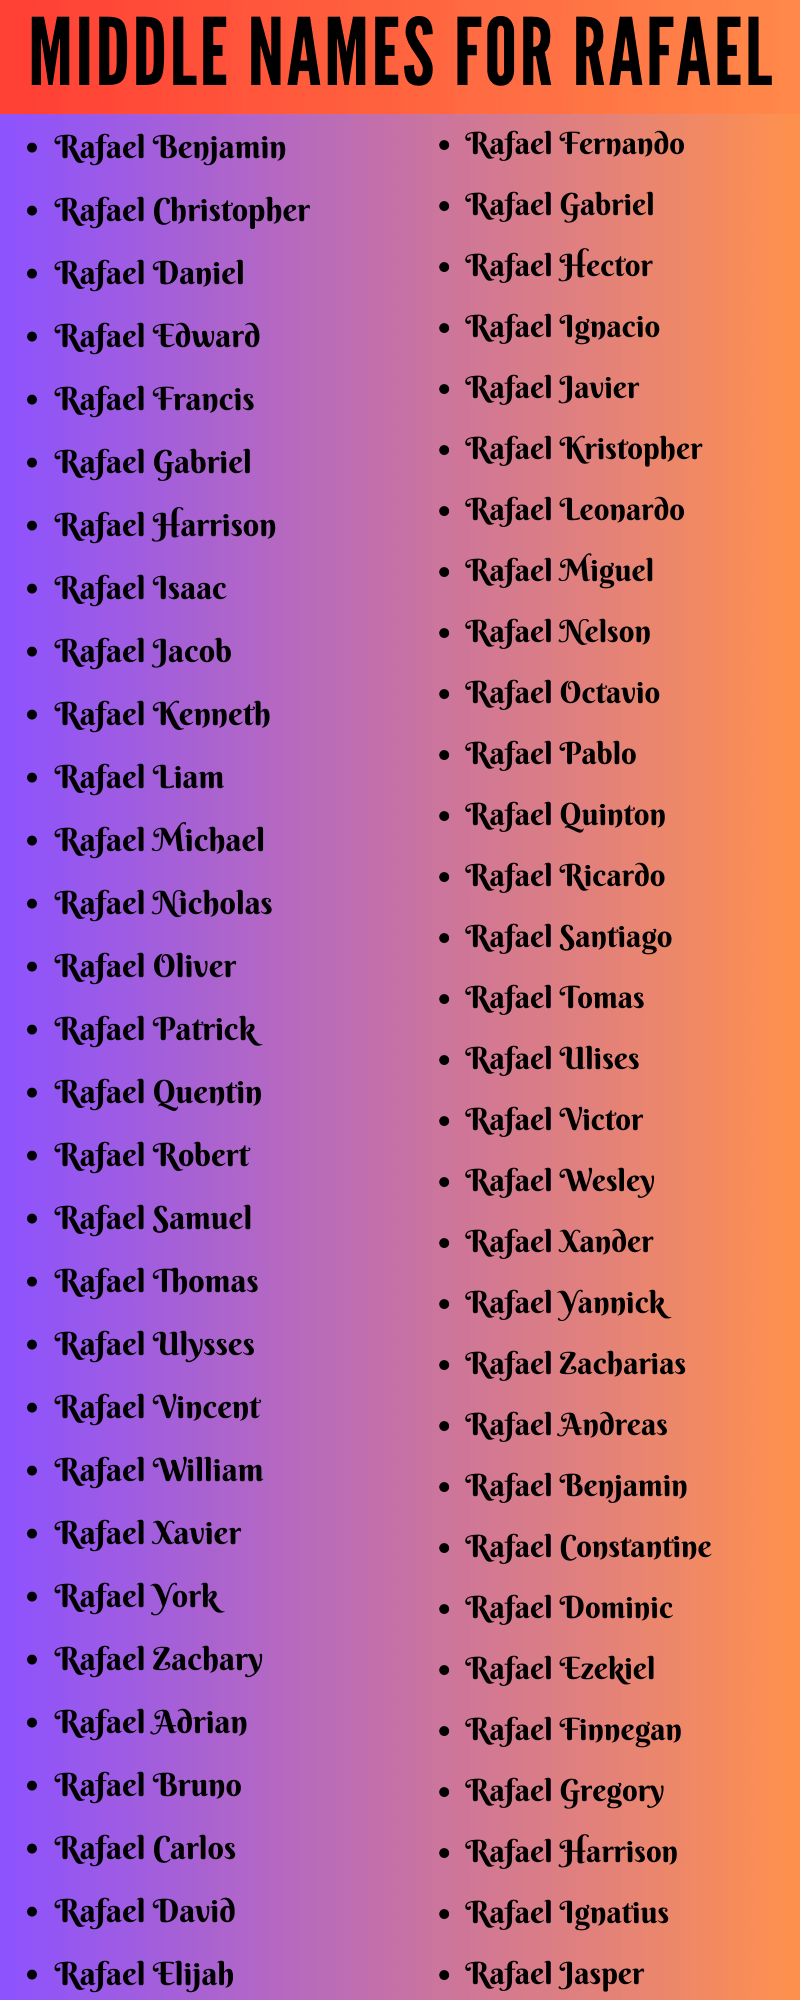  400 Classy Middle Names For Rafael